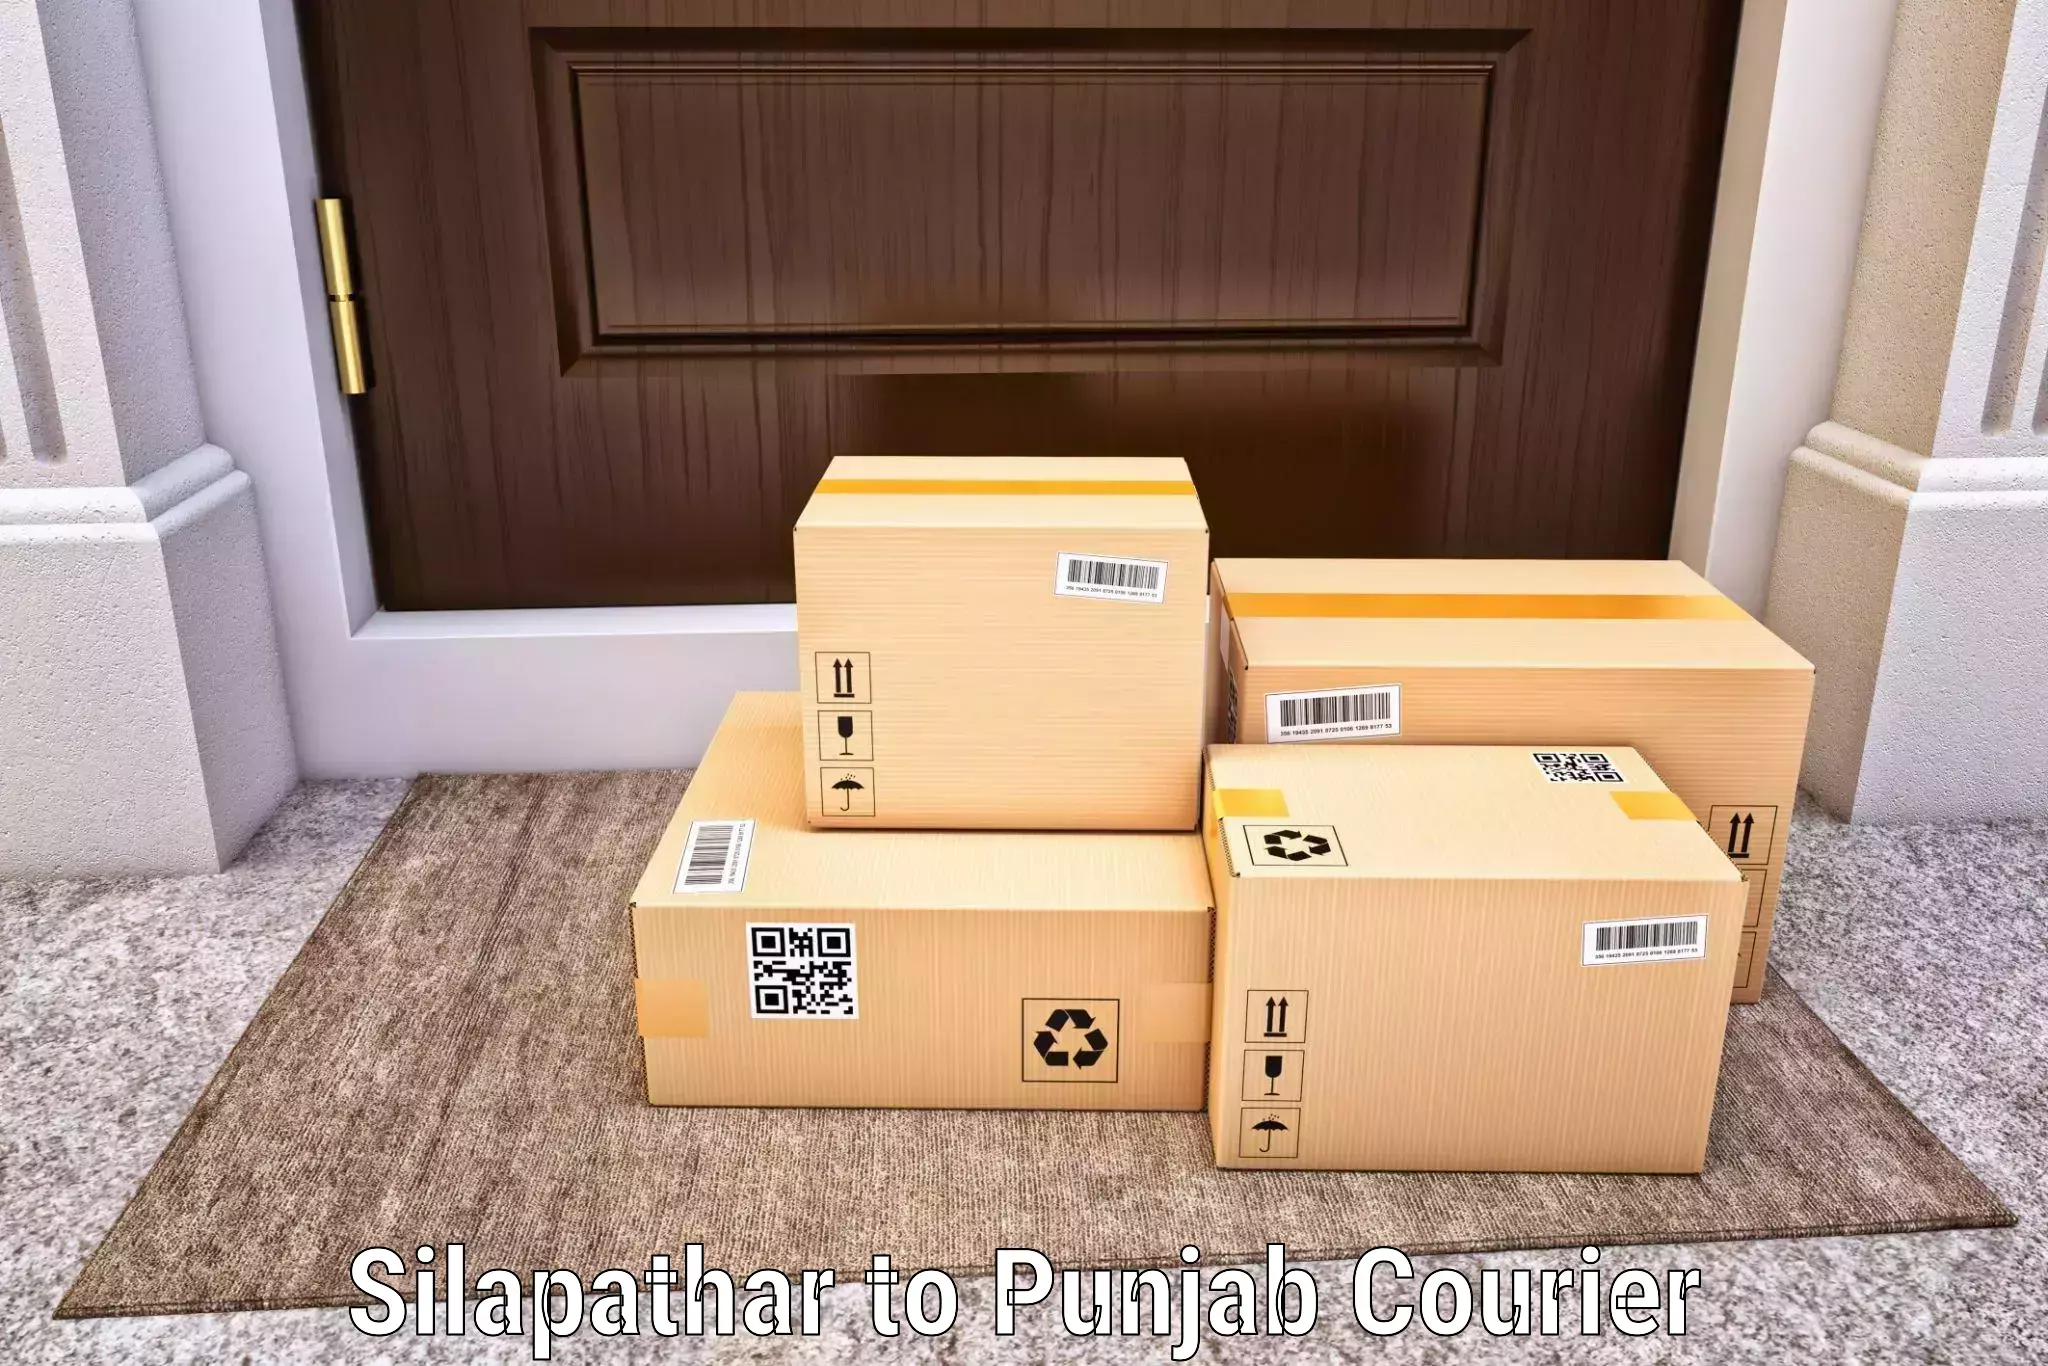 Efficient parcel service Silapathar to Punjab